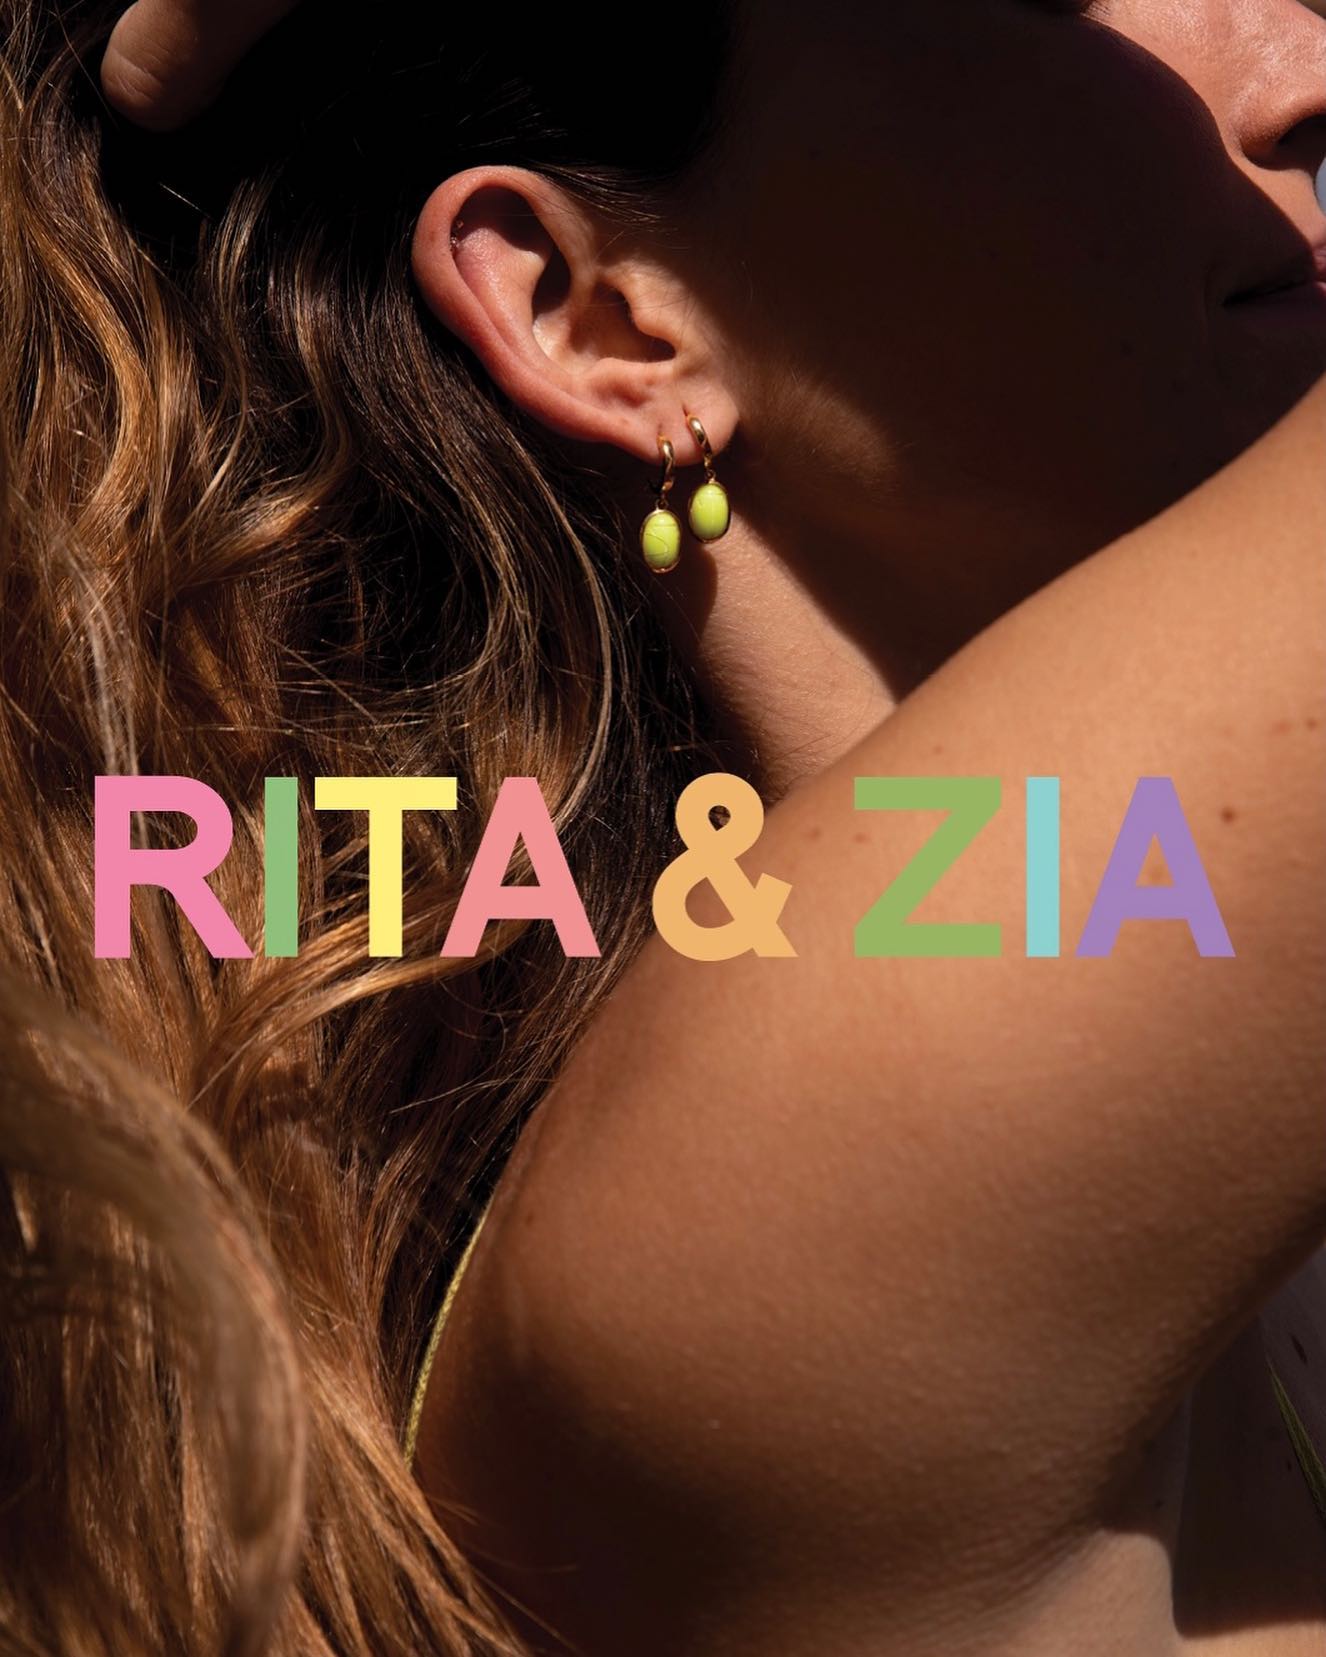 Summer ready with our scarabée pendant earring in Yellow Fluo Galalithe #myritazia

#summer #jewellery #jewelryaddict #shopping #lifestyle #fashion